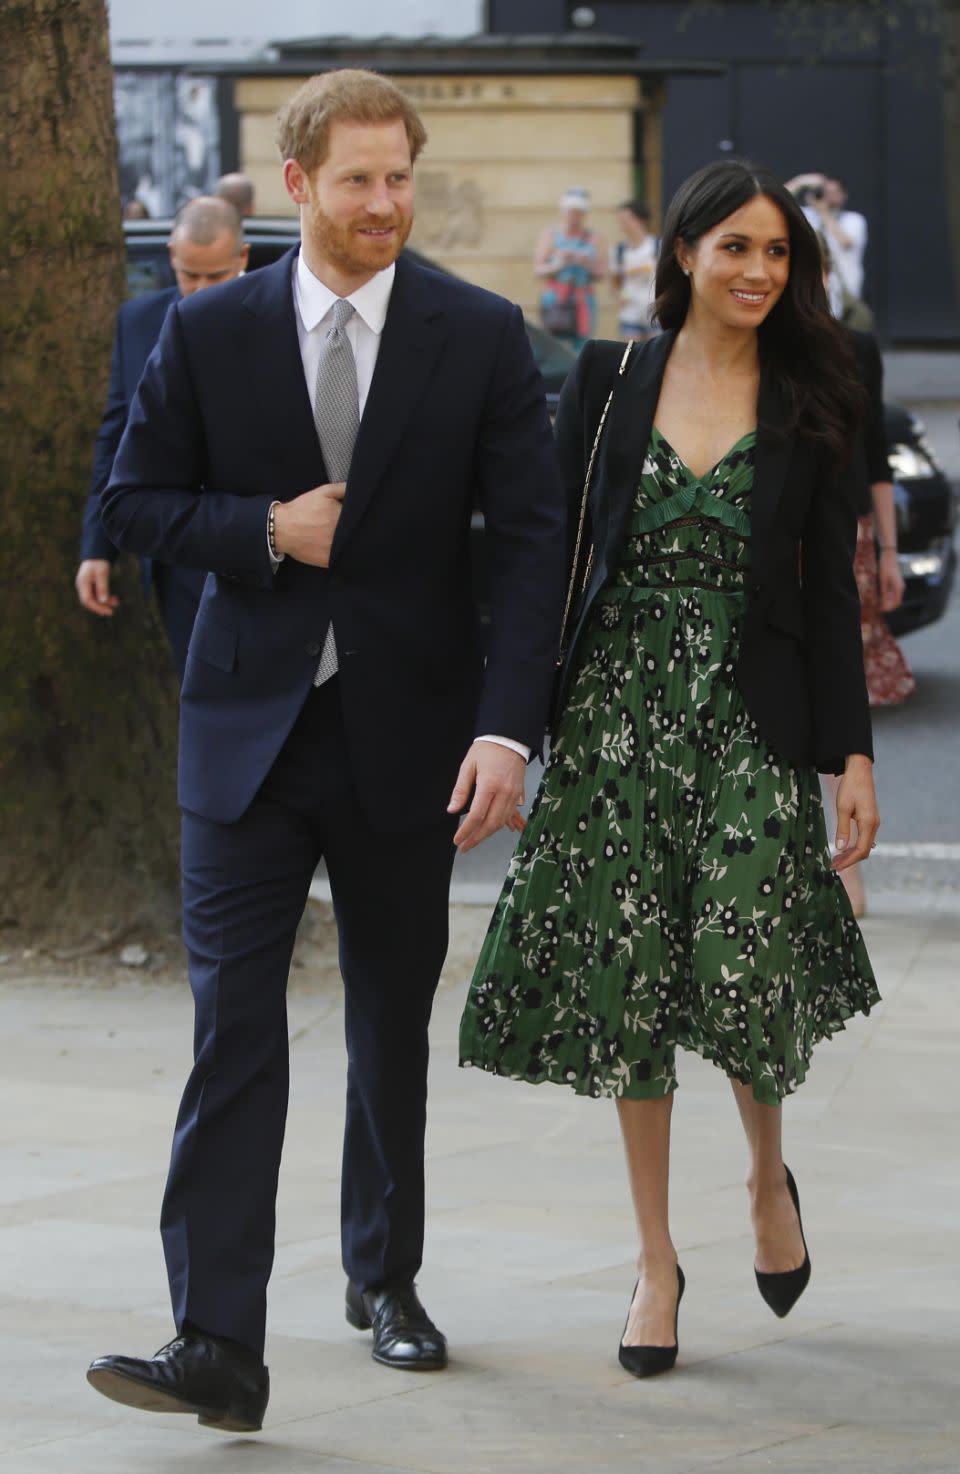 Prince Harry and his fiancée, Meghan Markle, took a break from counting down the days to their wedding, and stepped out on Saturday to a special Invictus Games reception in honor of the upcoming games in Sydney. Photo: Getty Images